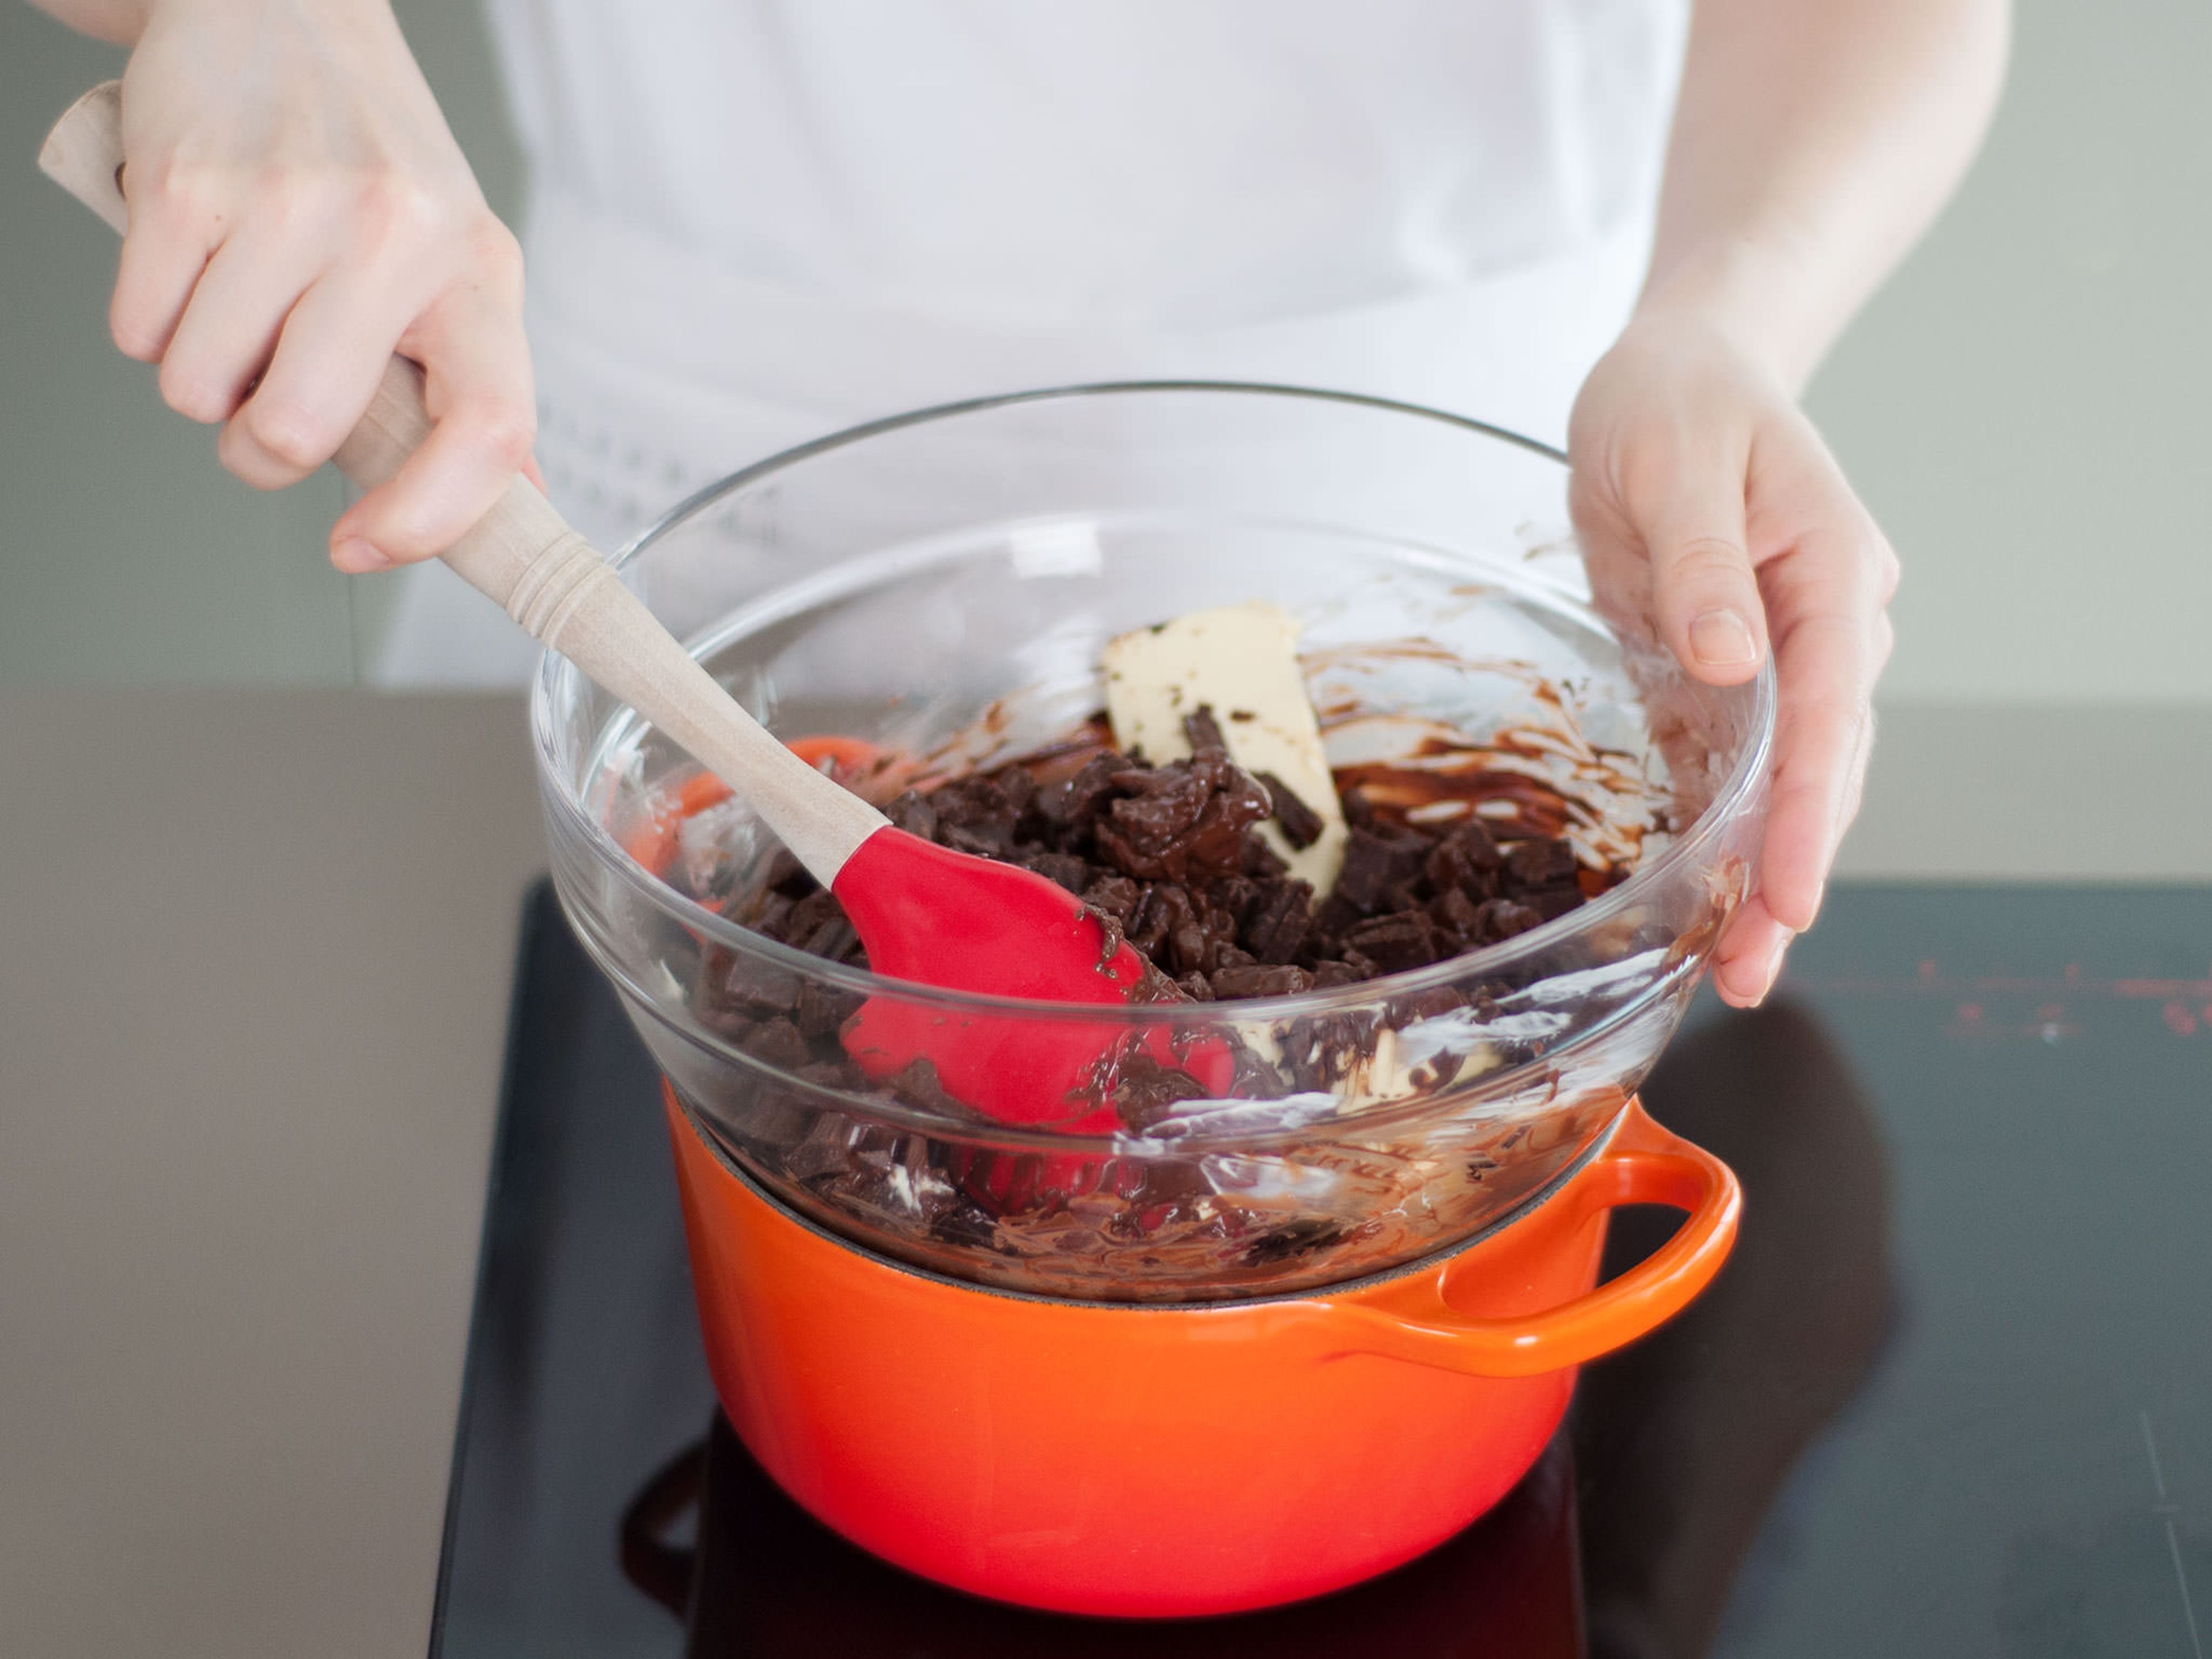 Melt butter and chocolate over a double boiler, stirring occasionally, until combined. Do not stir too much, or the chocolate will seize and lose its shine.